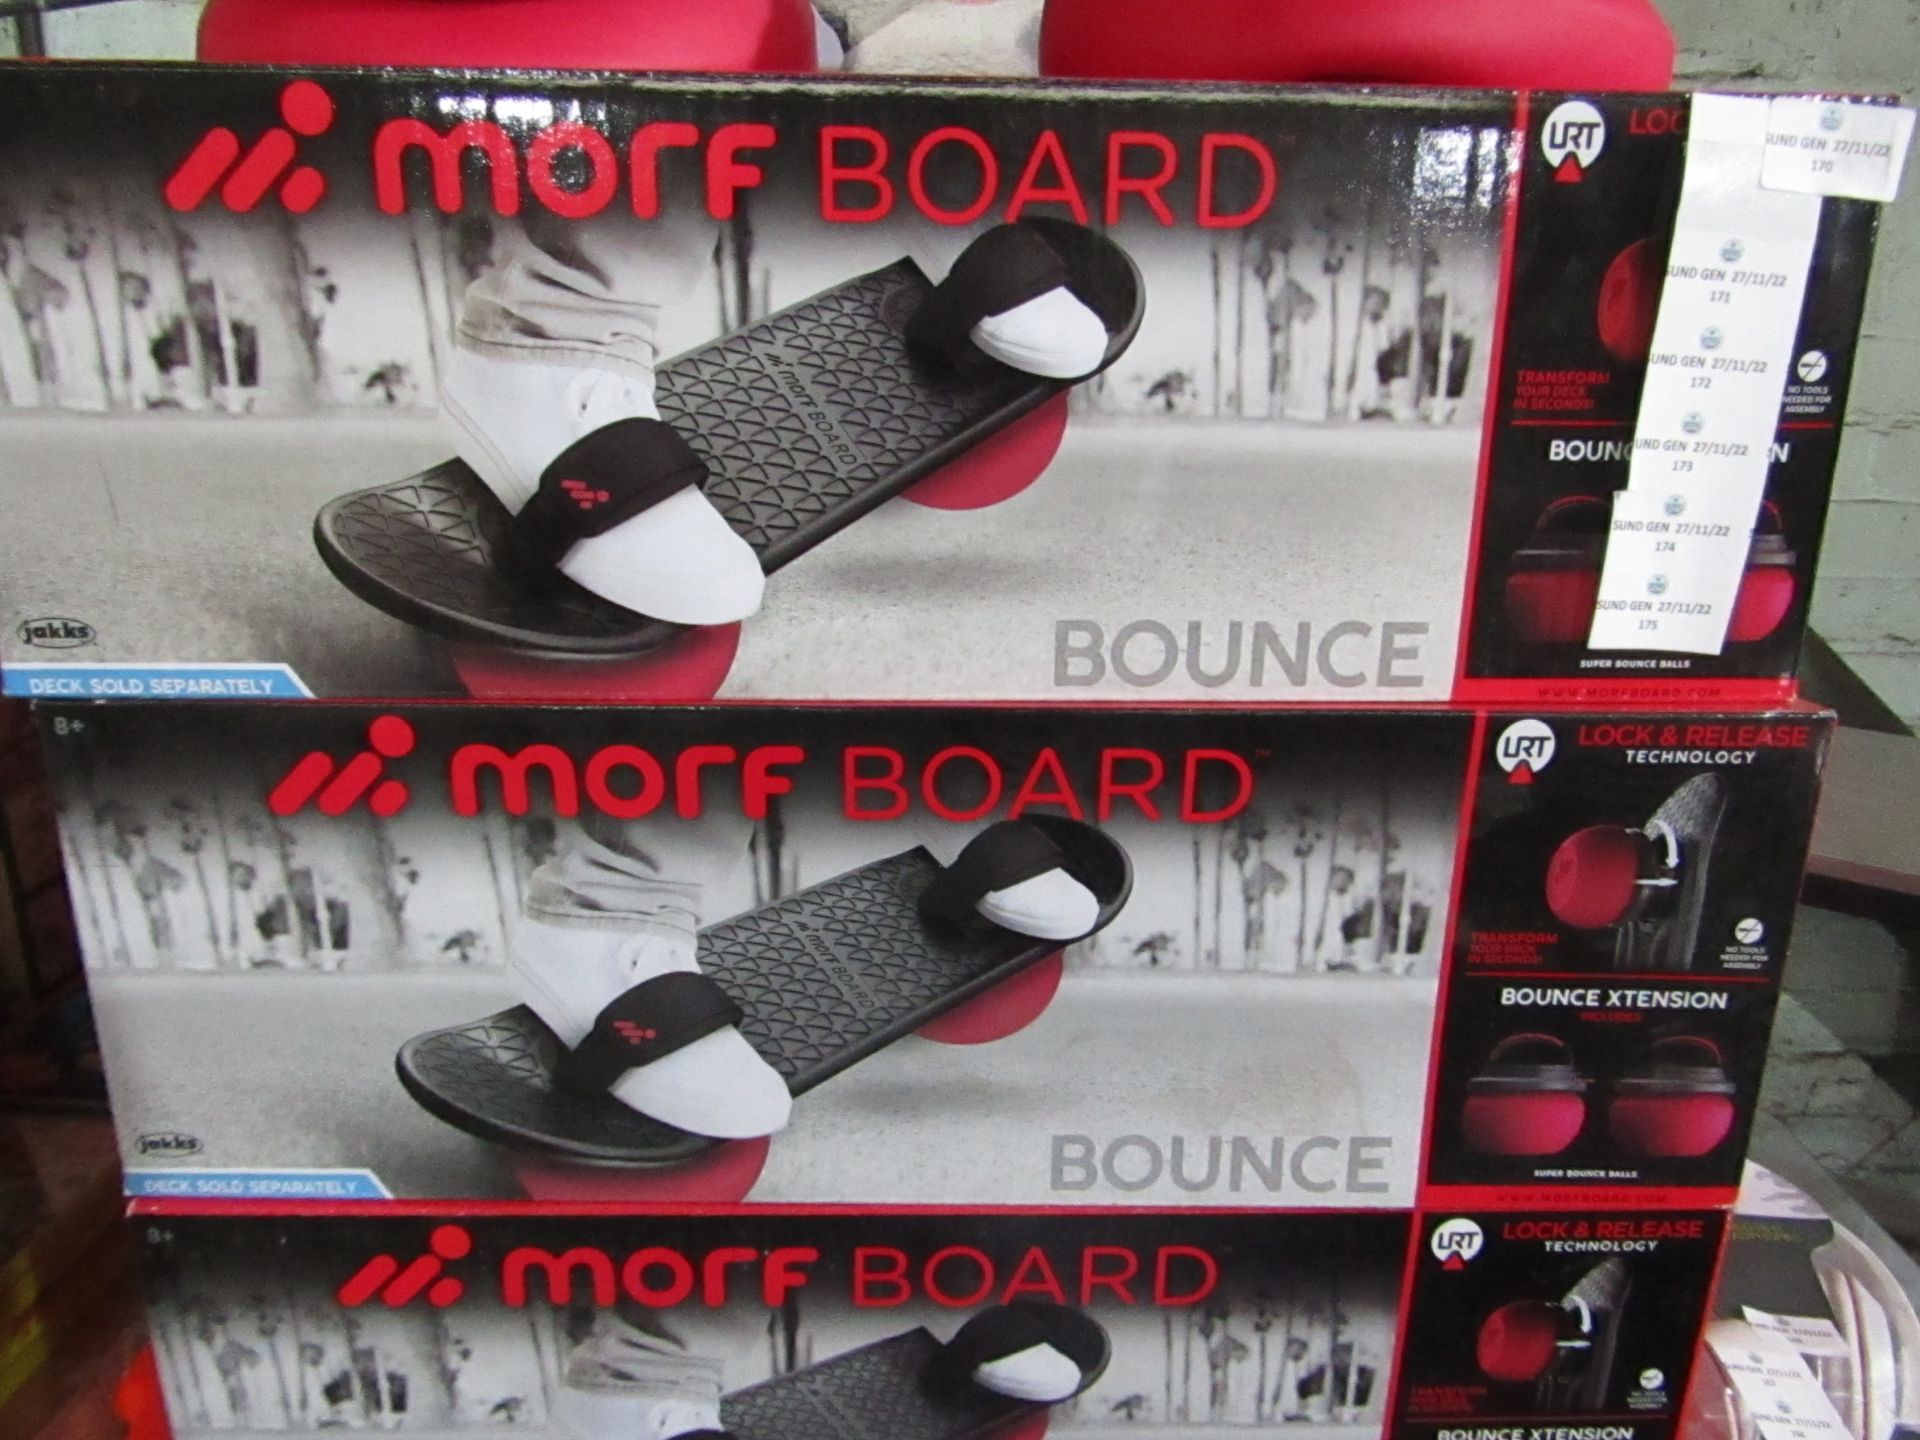 Murf Board - Bounce Xtension Super Bounce Balls ( Deck Sold Separately ) - Unchecked & Boxed.